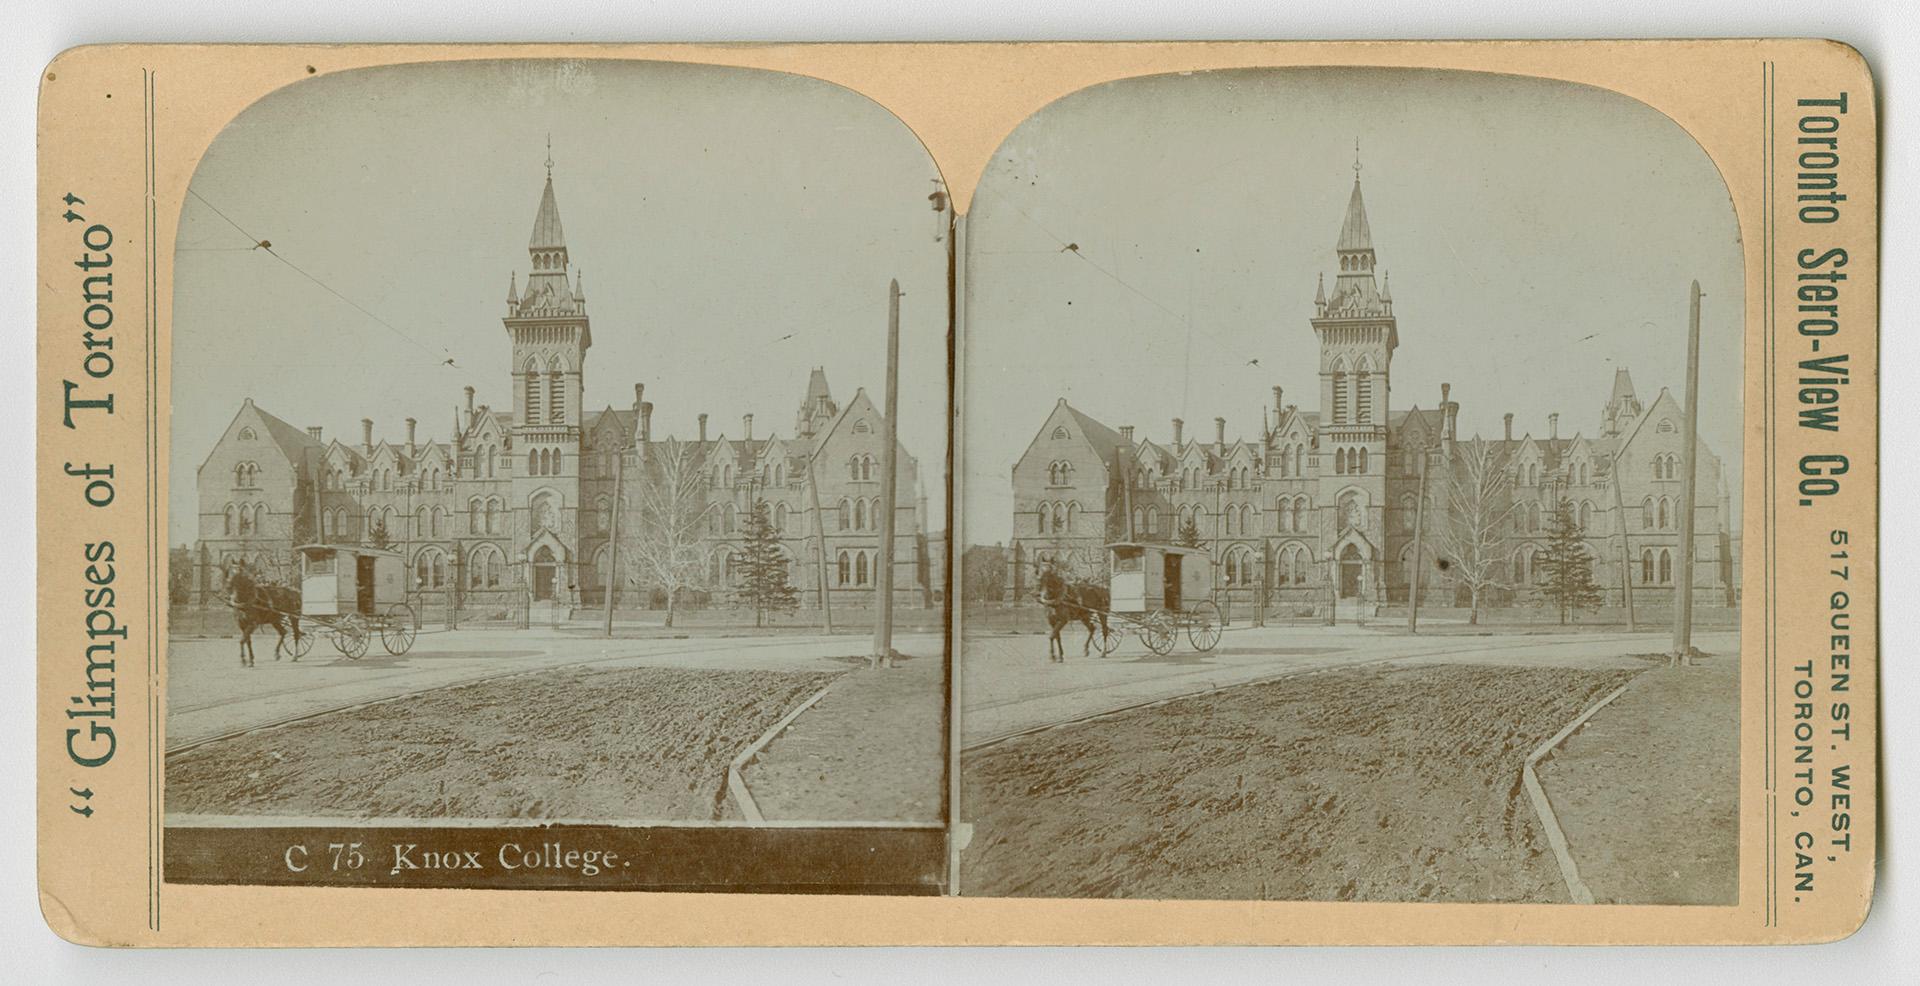 Pictures show a horse and wagon on a road in front of a large gothic building with a central to ...